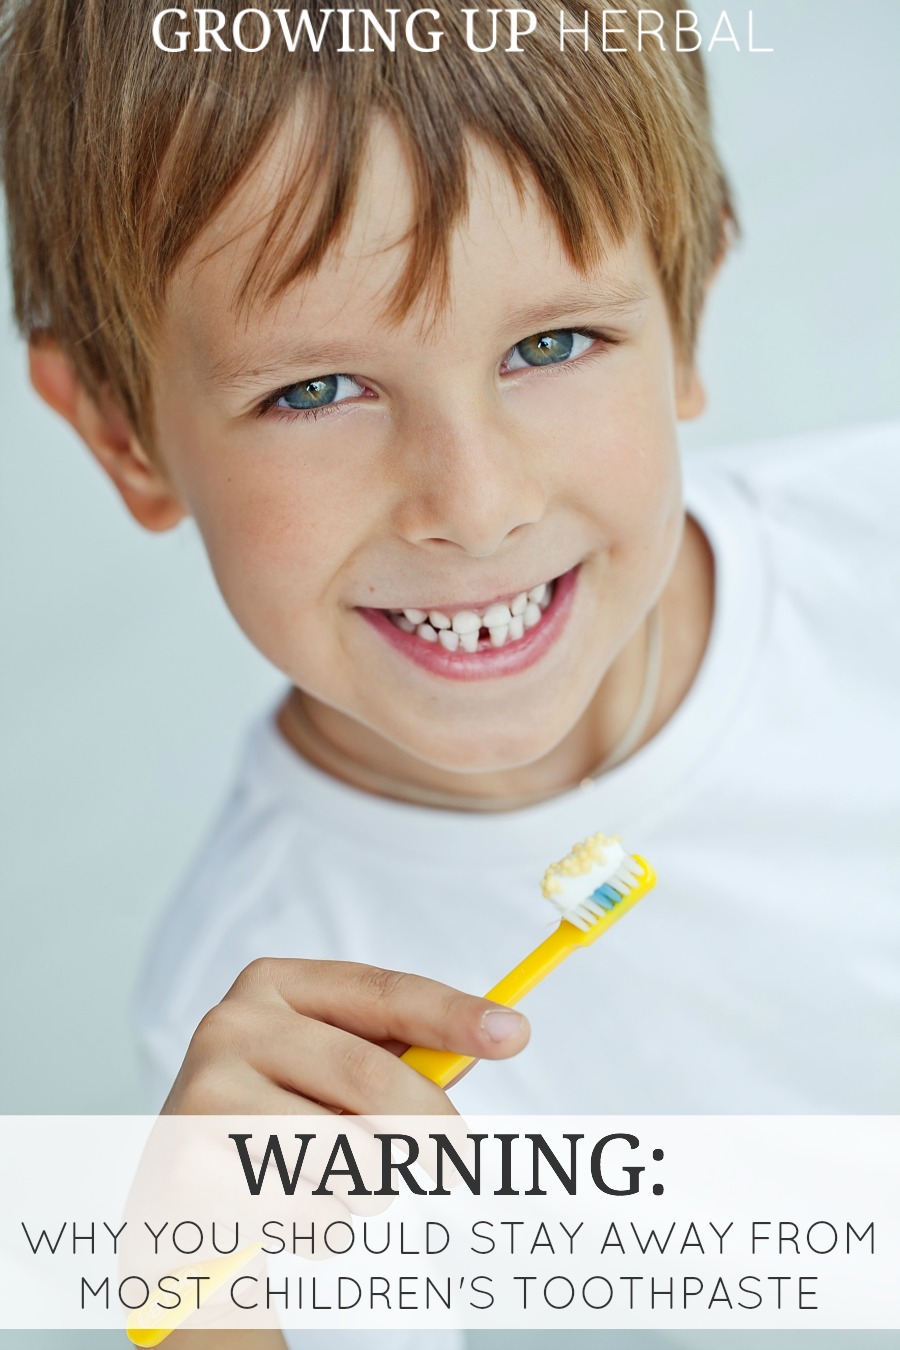 WARNING! Why You Should Stay Away From Most Children's Toothpastes | GrowingUpHerbal.com -- Just because a toothpaste is for children doesn't mean it's good for their teeth or their health. Learn more here.